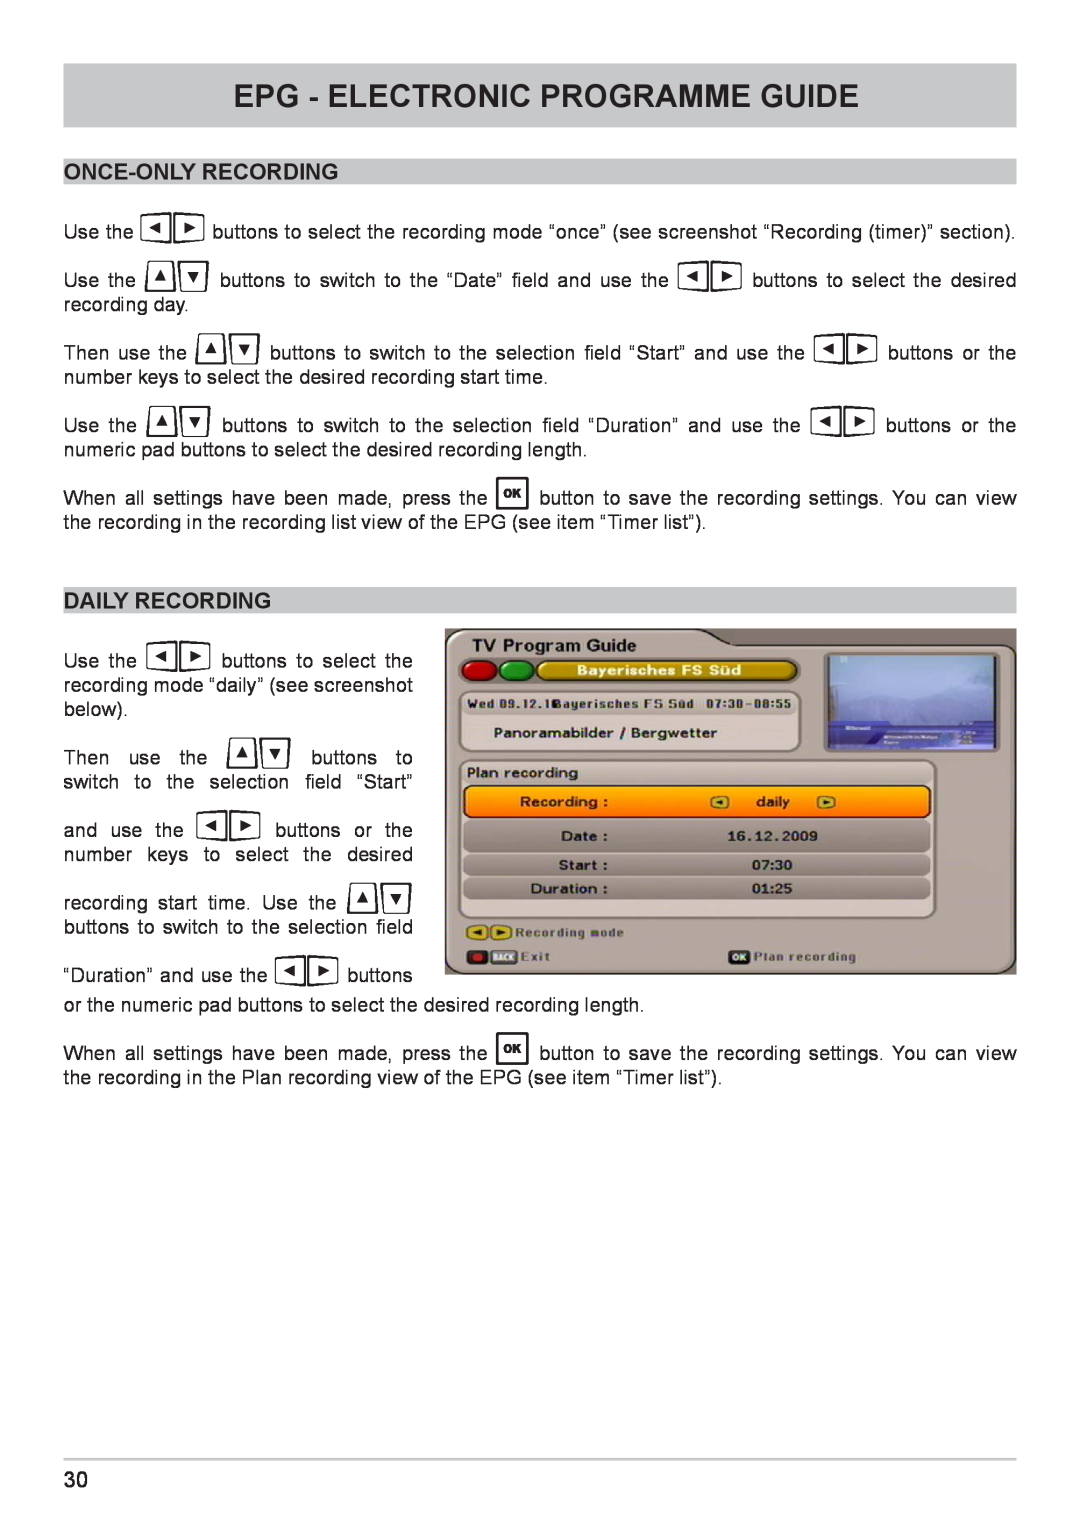 Kathrein UFC 662sw manual Once-Only Recording, Daily Recording, Epg - Electronic Programme Guide 